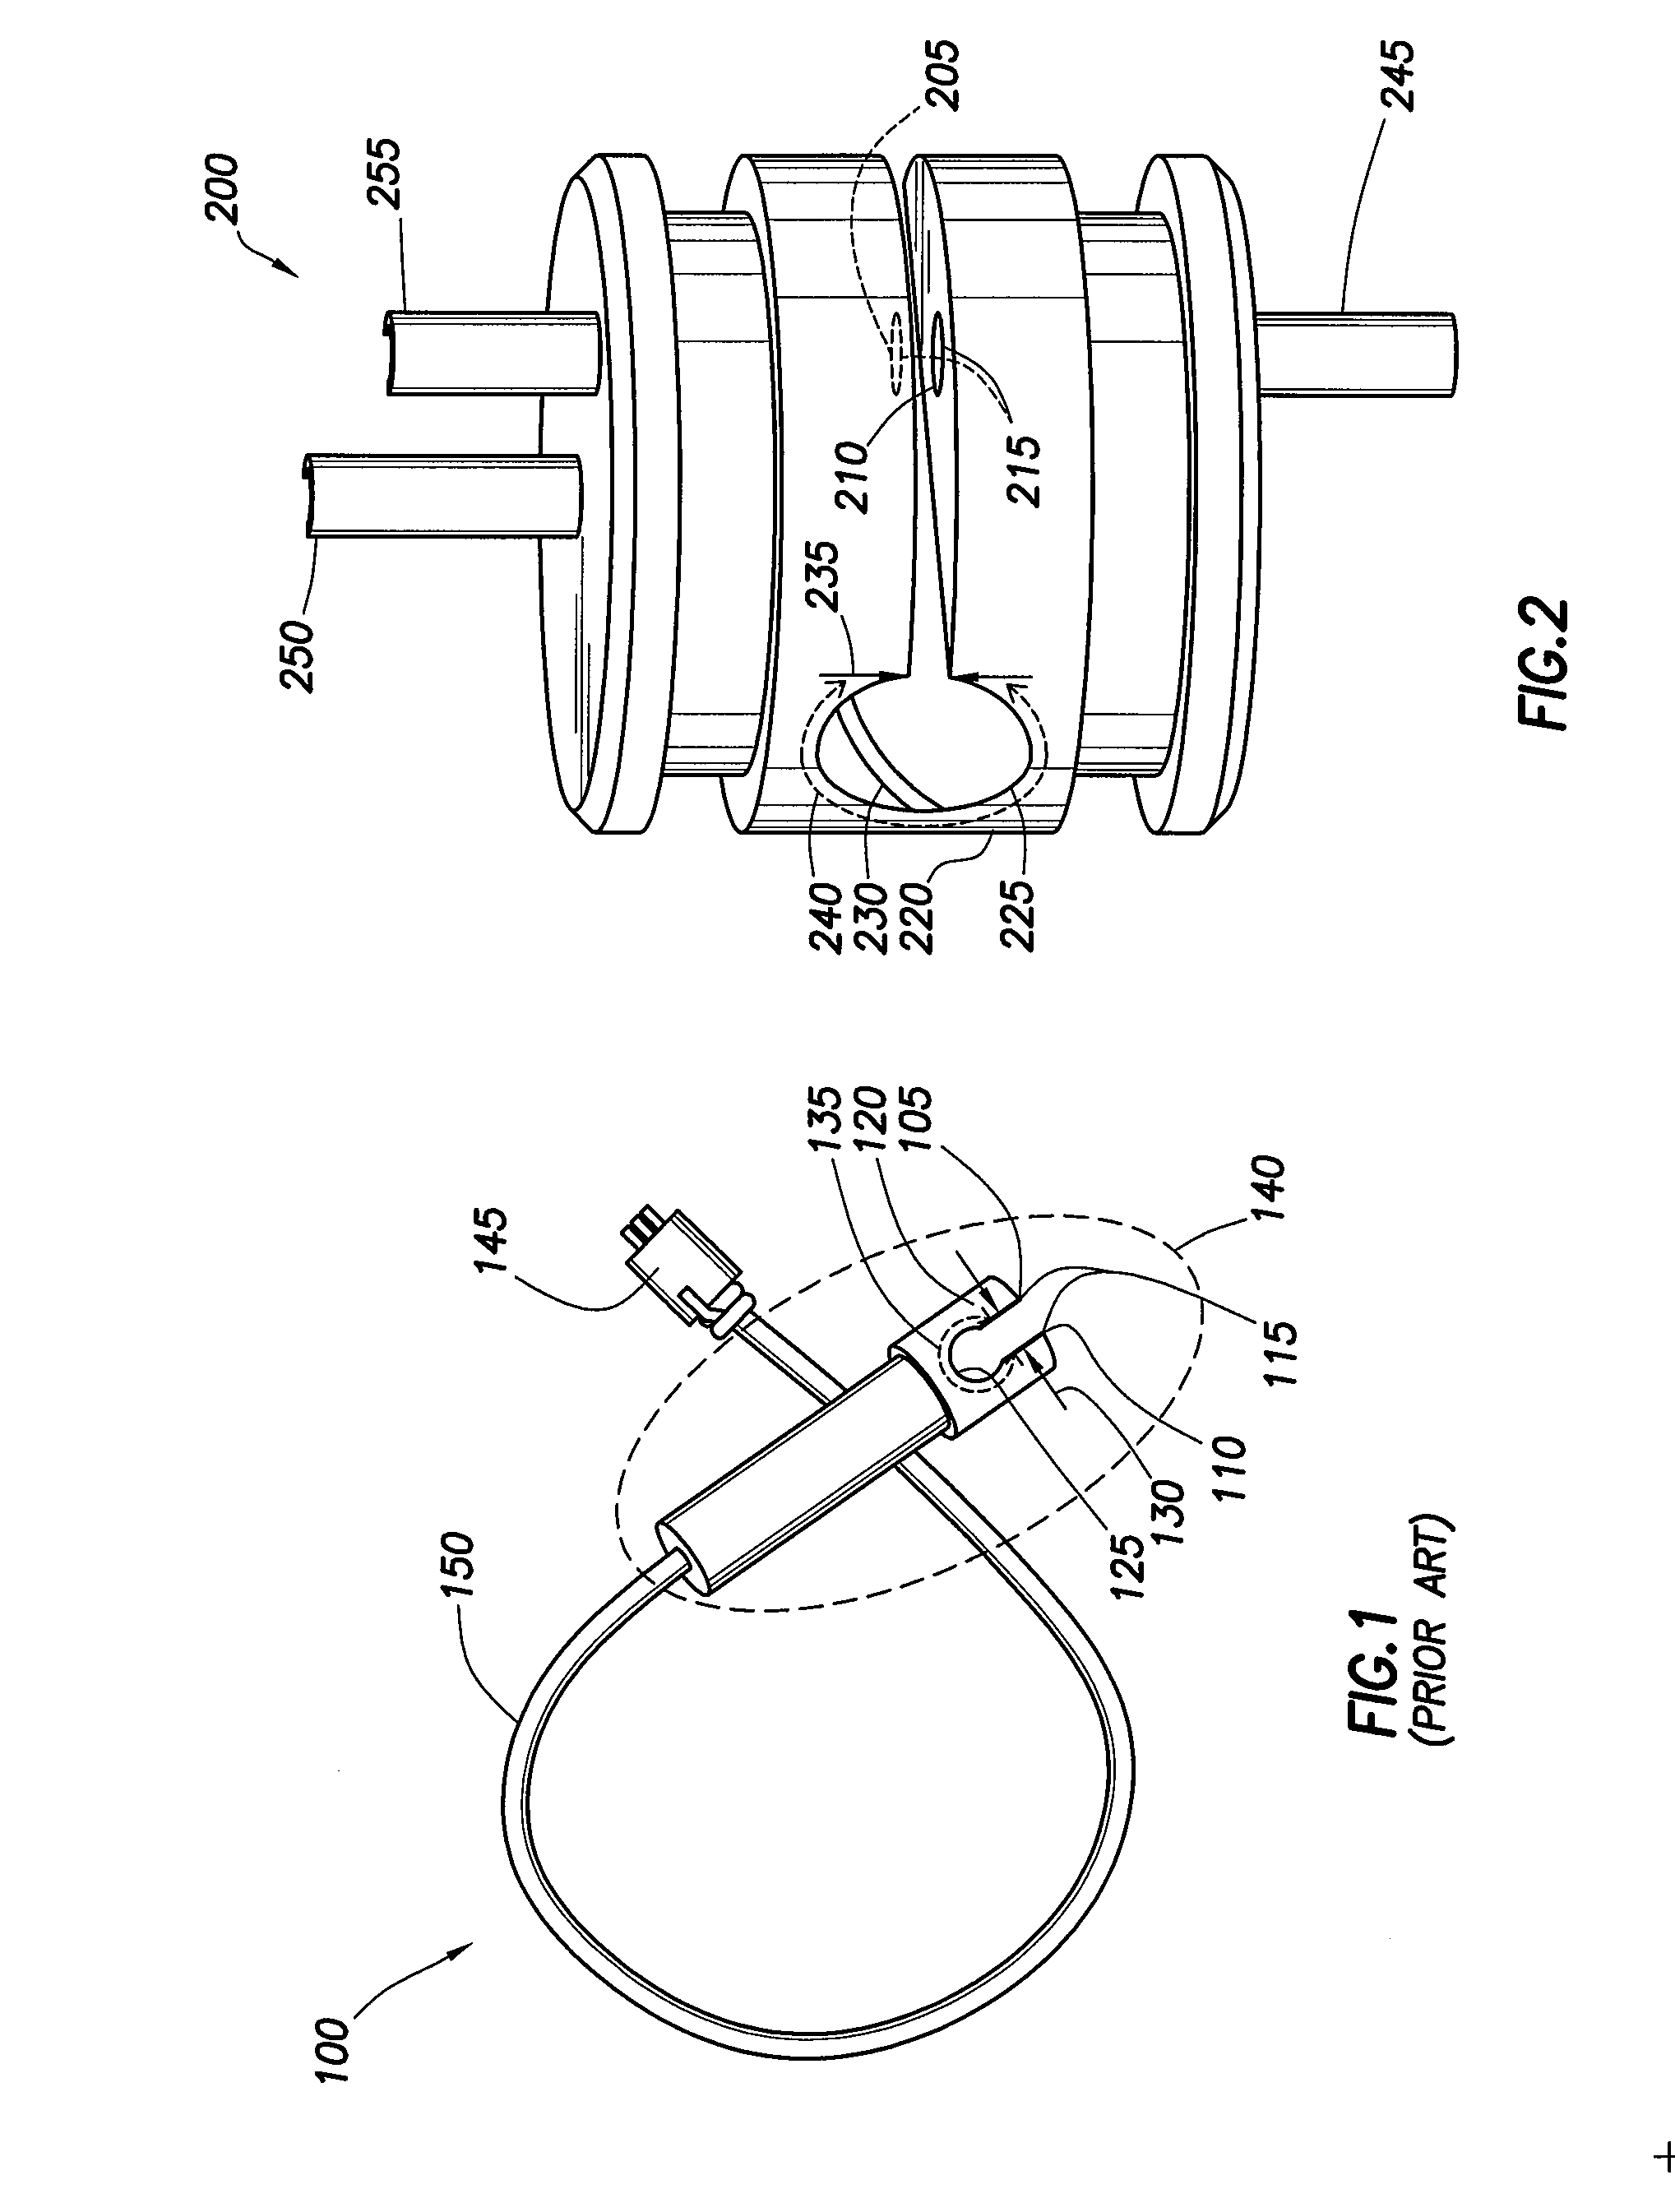 Methods and Systems for Measurement of Fluid Electrical Stability